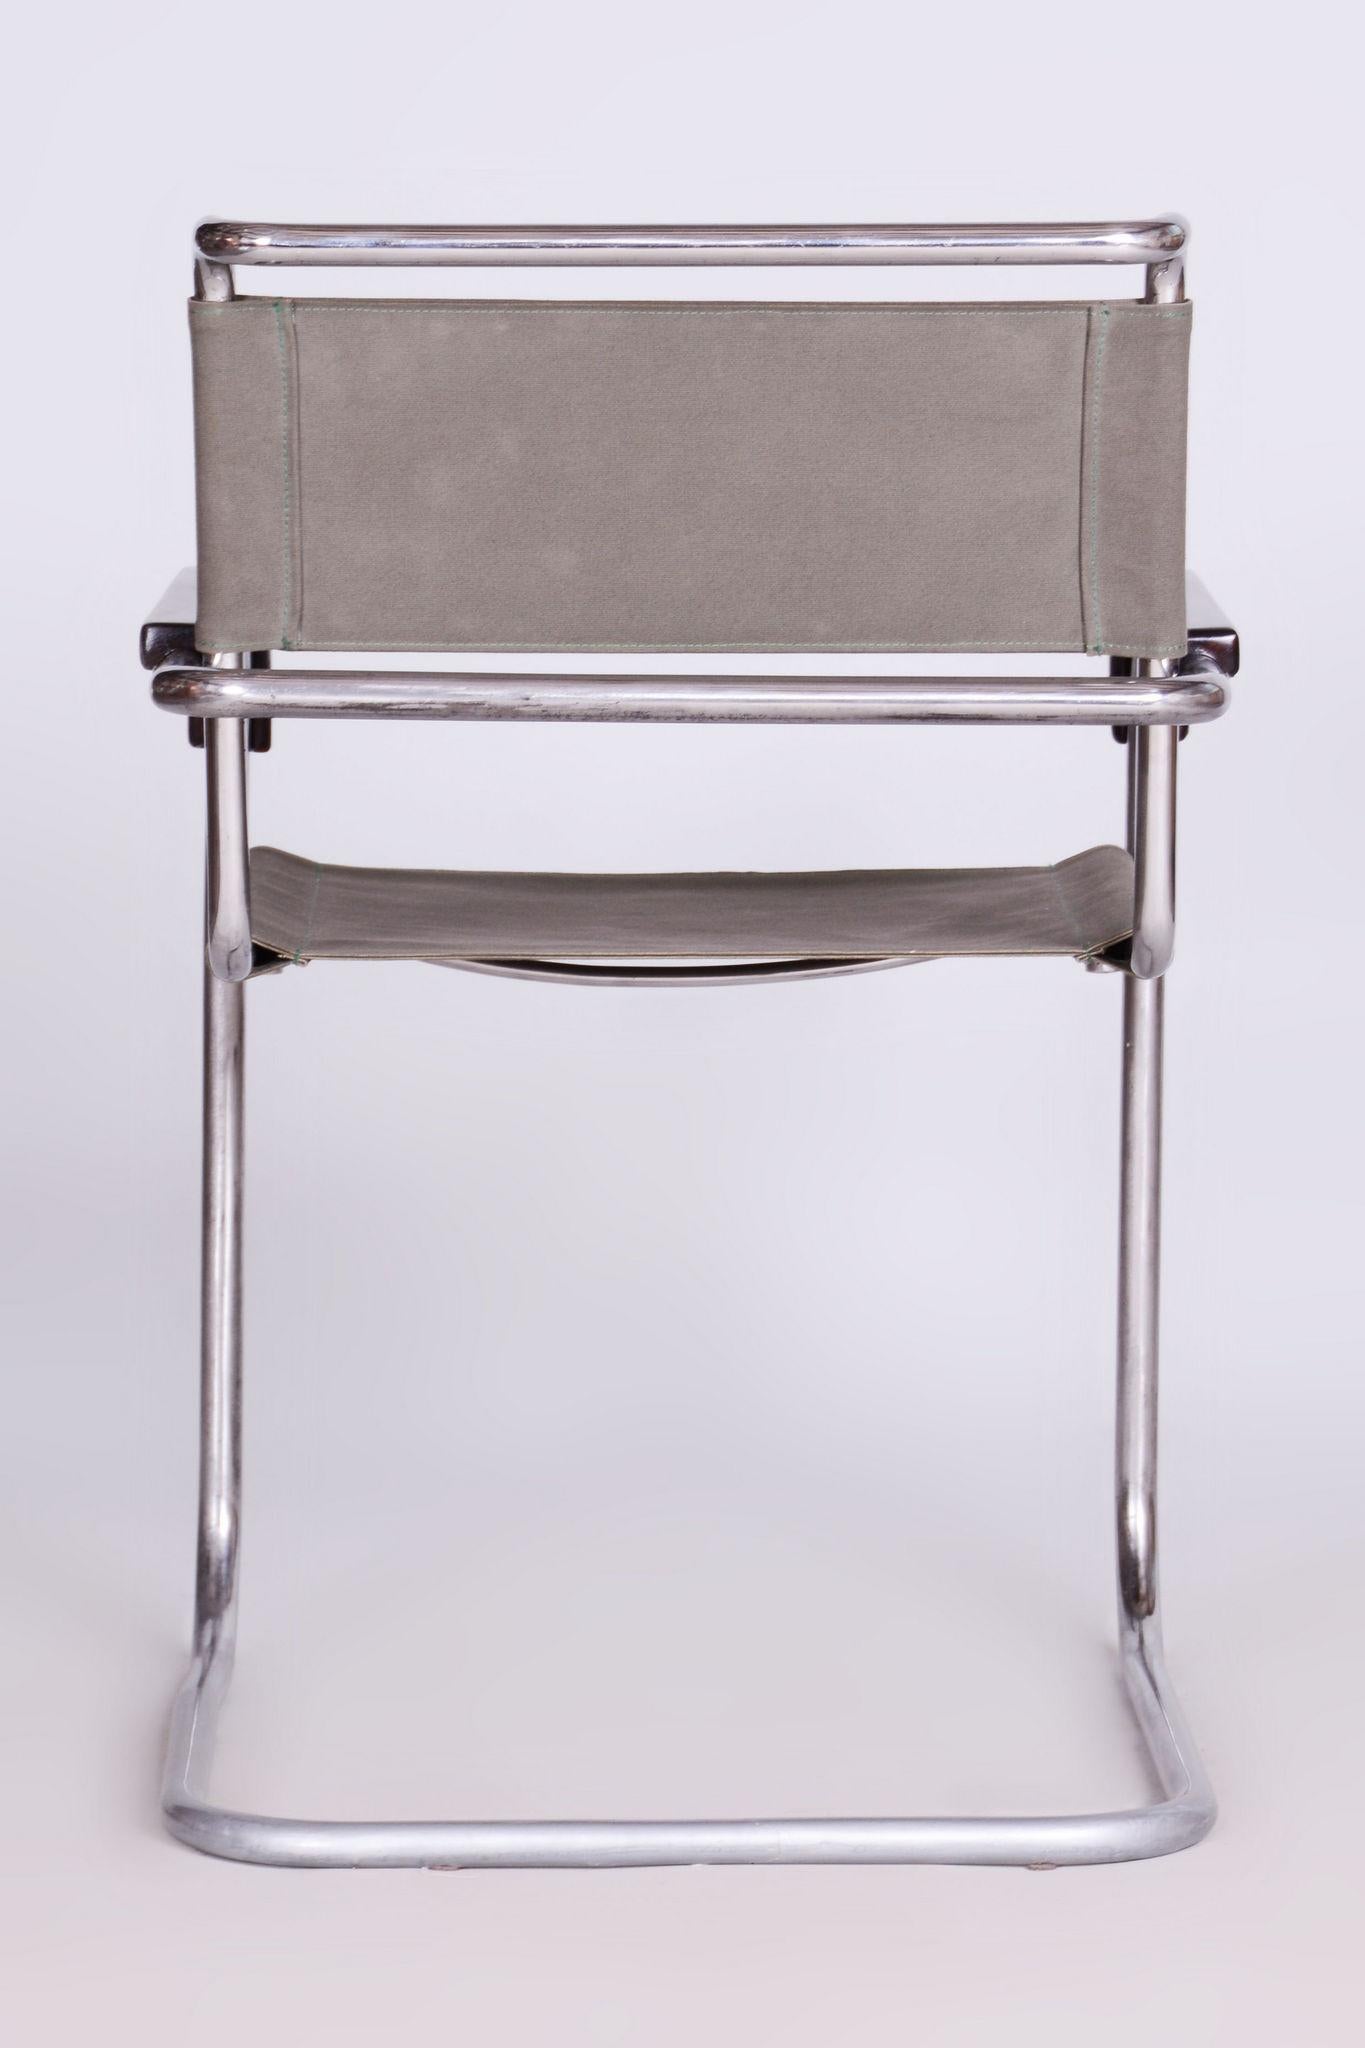 Restored Bauhaus Armchair Designed by Marcel Breuer and made by Thonet.

Source: Czechia (Czechoslovakia)
Period: 1930-1939
Maker: Thonet
Designer: Marcel Breuer
Material: Chrome-Plated Steel, Iron-Garn Fabric

Designed by world-renowned German